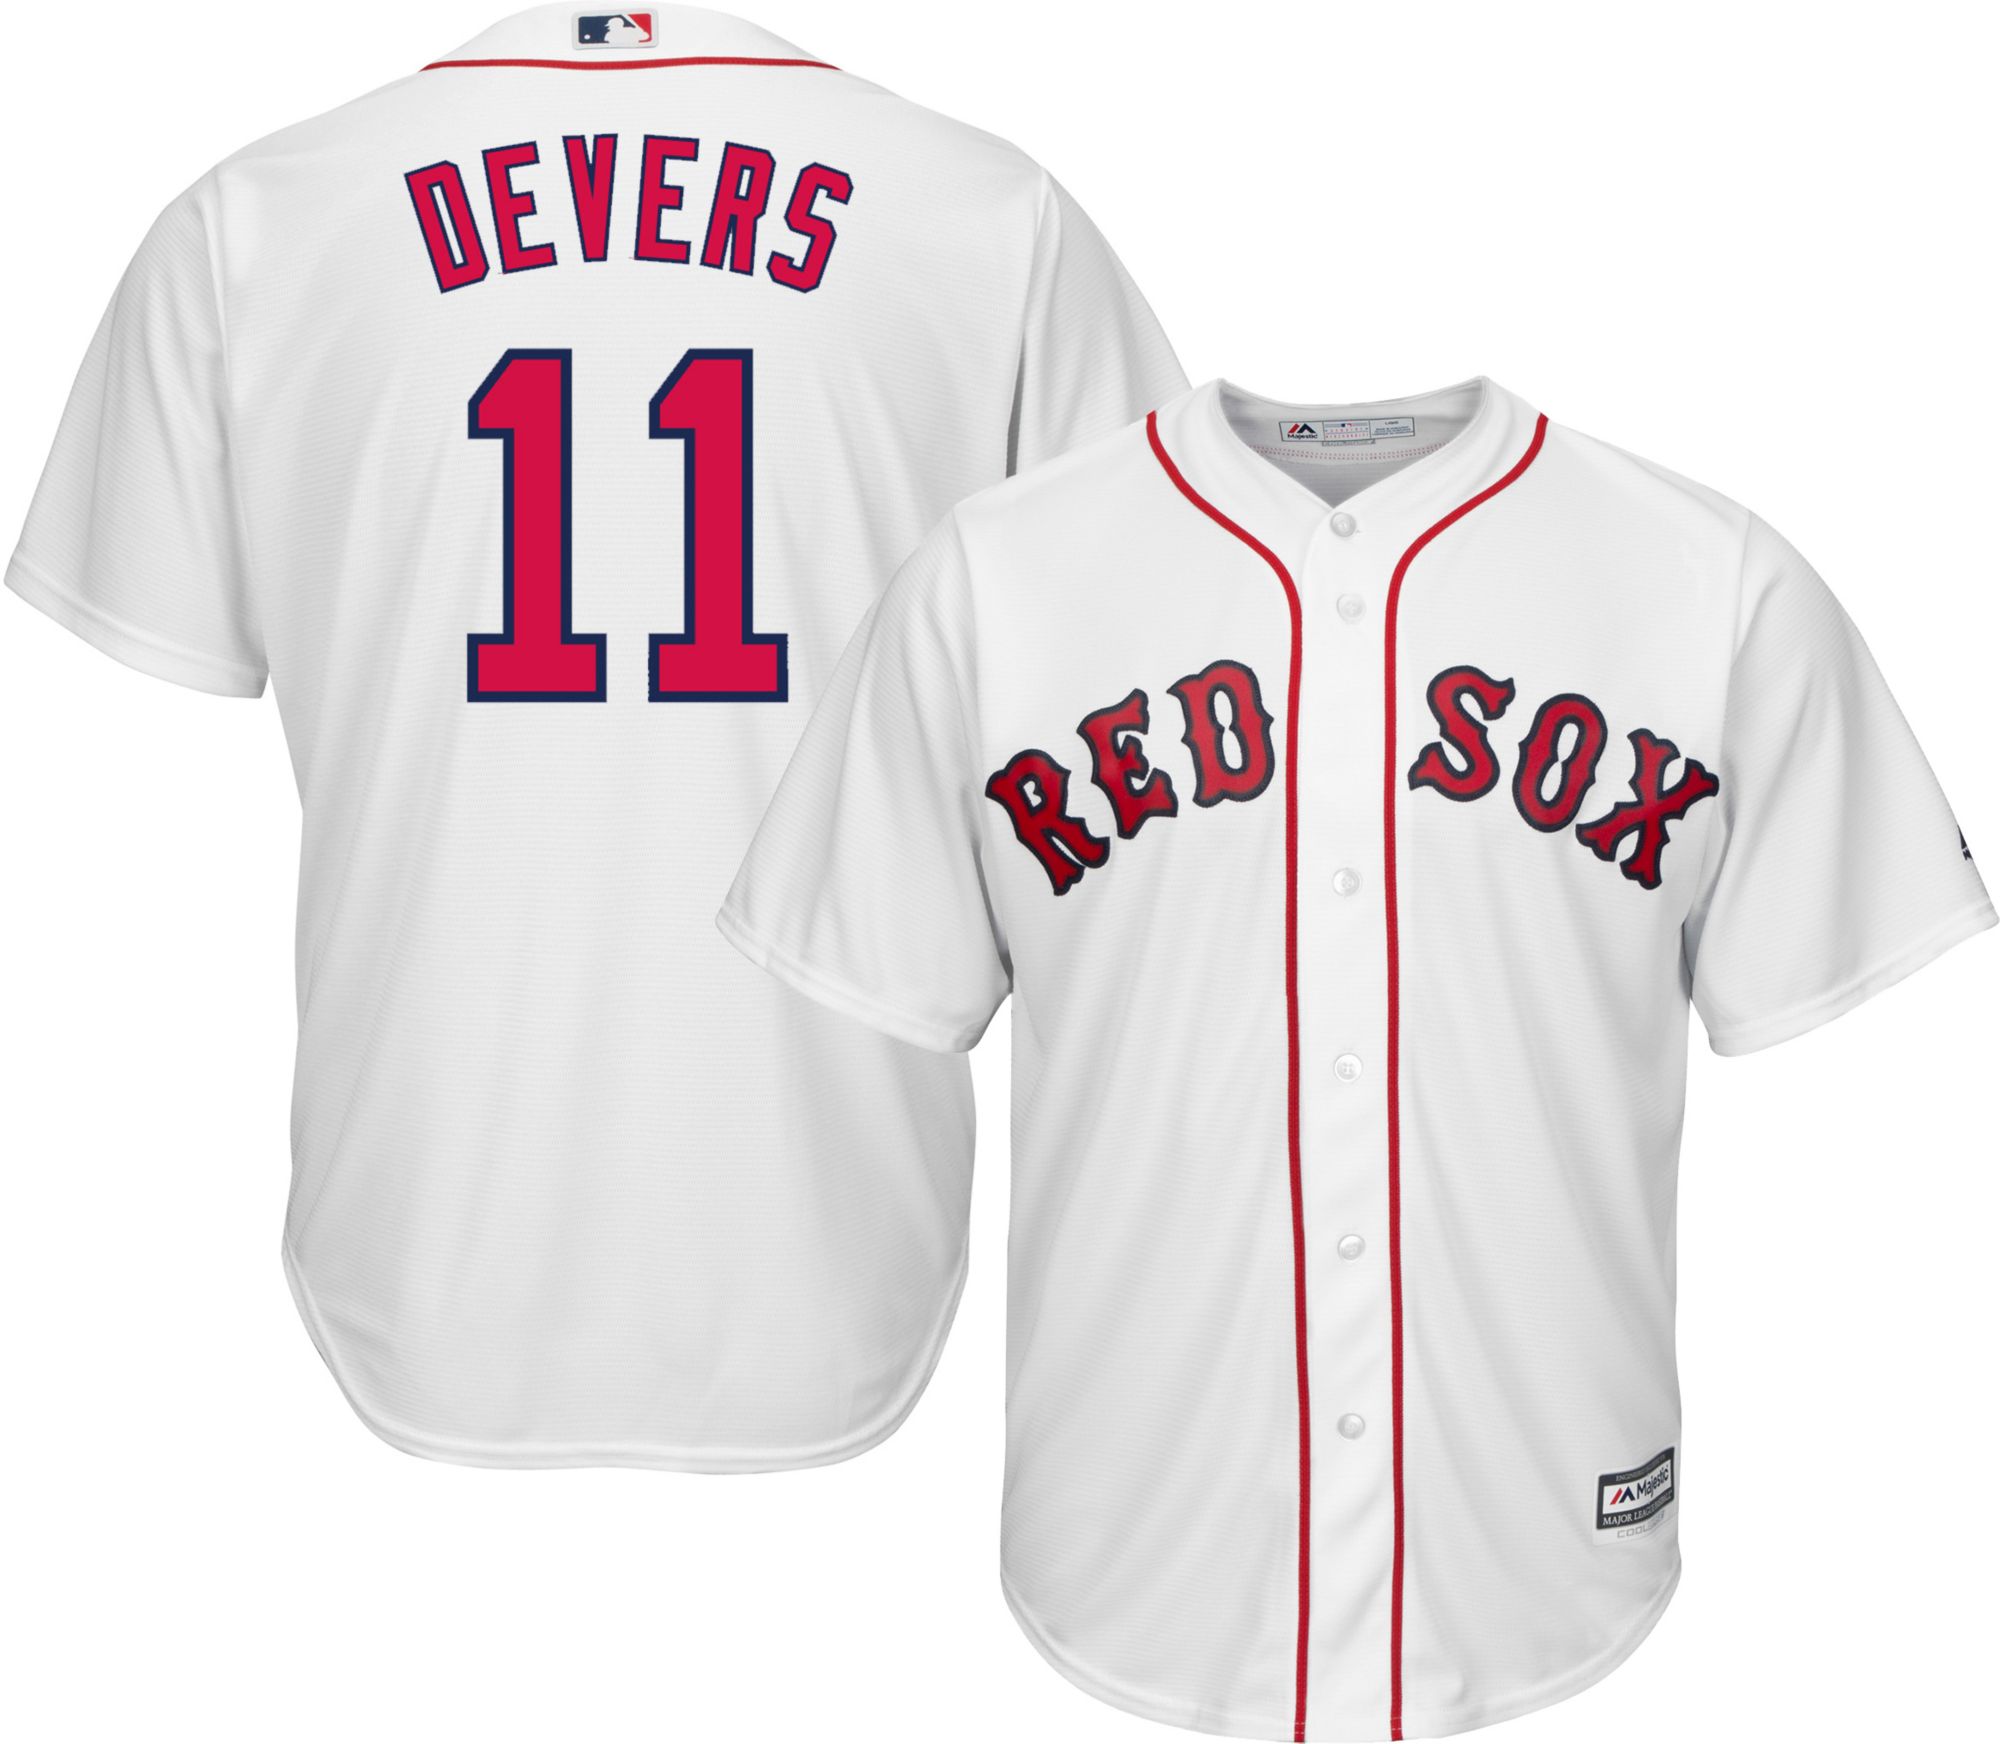 buy red sox jersey